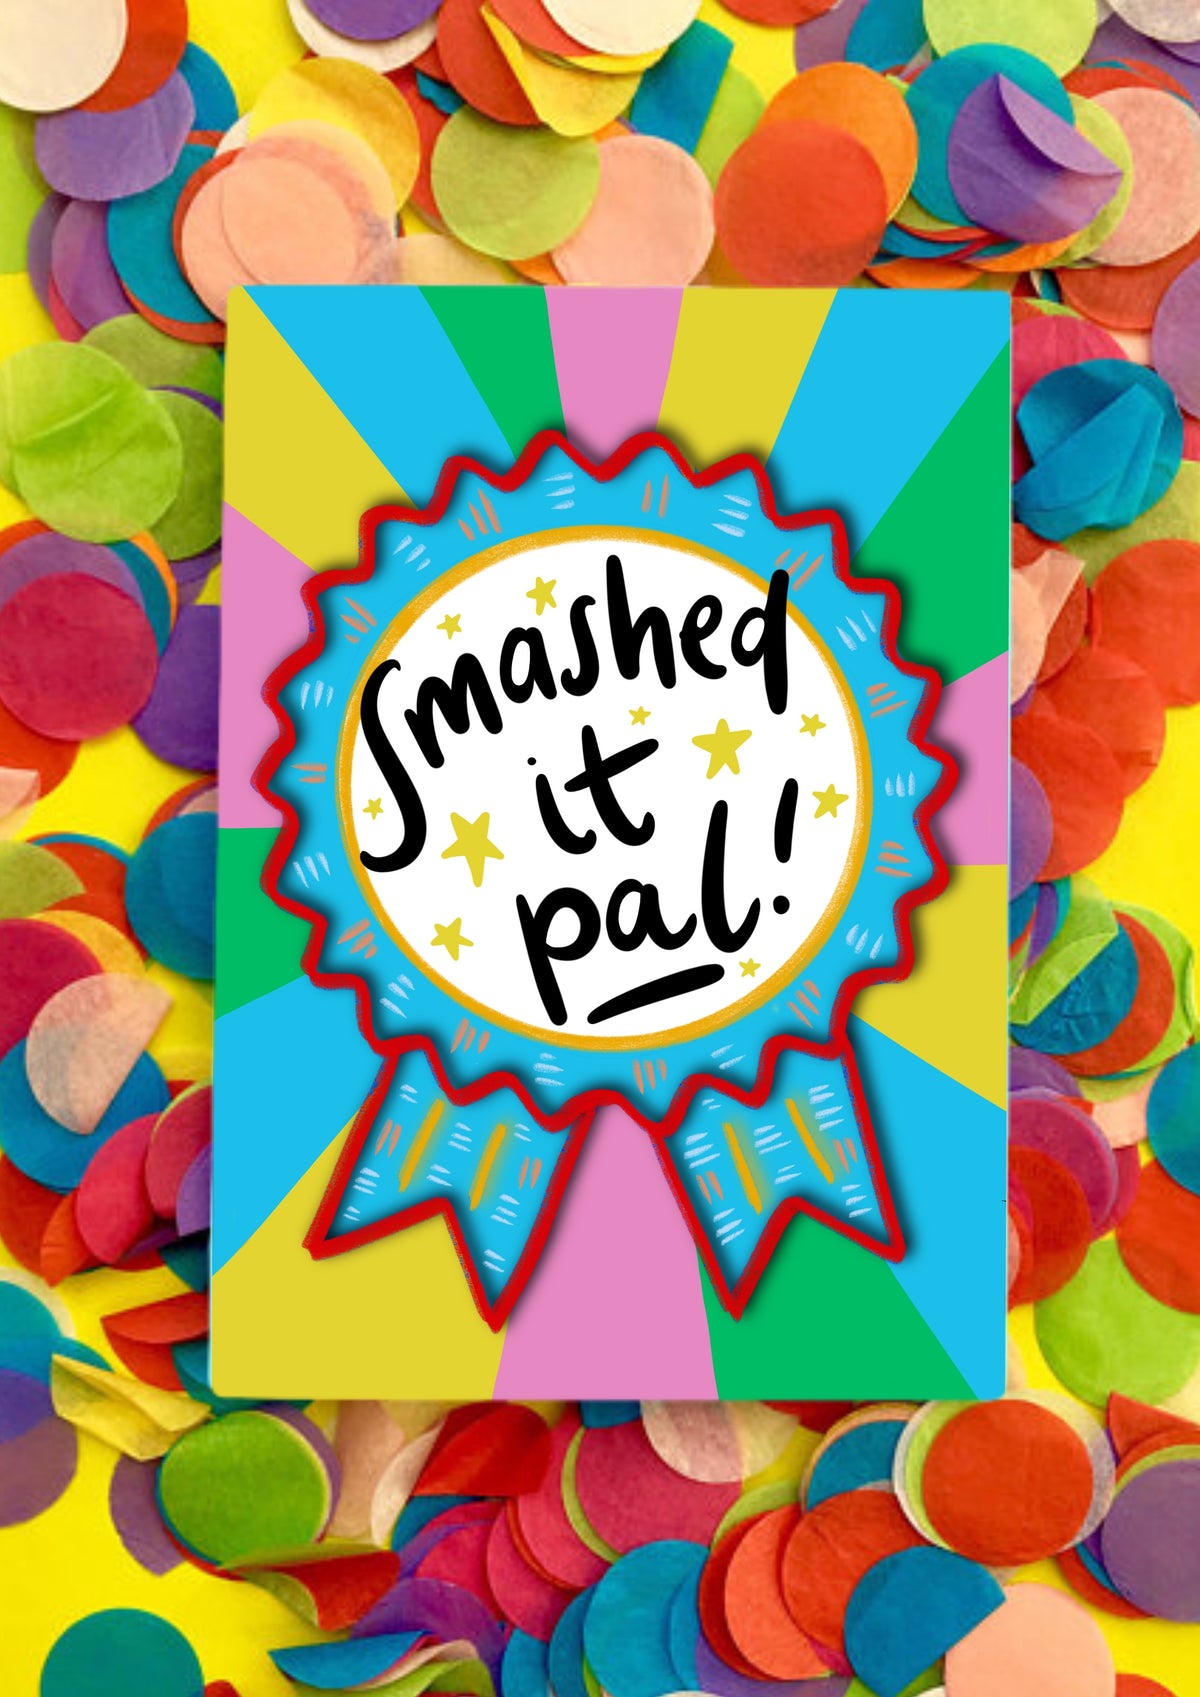 A greetings card with a rainbow sunbeam designed background with a large rosette motif. The rosette is light blue with red edging and has a large white circle in the middle that has the words handwritten &#39;smashed it pal&#39;. The card is lying on a bed of rainbow confetti.